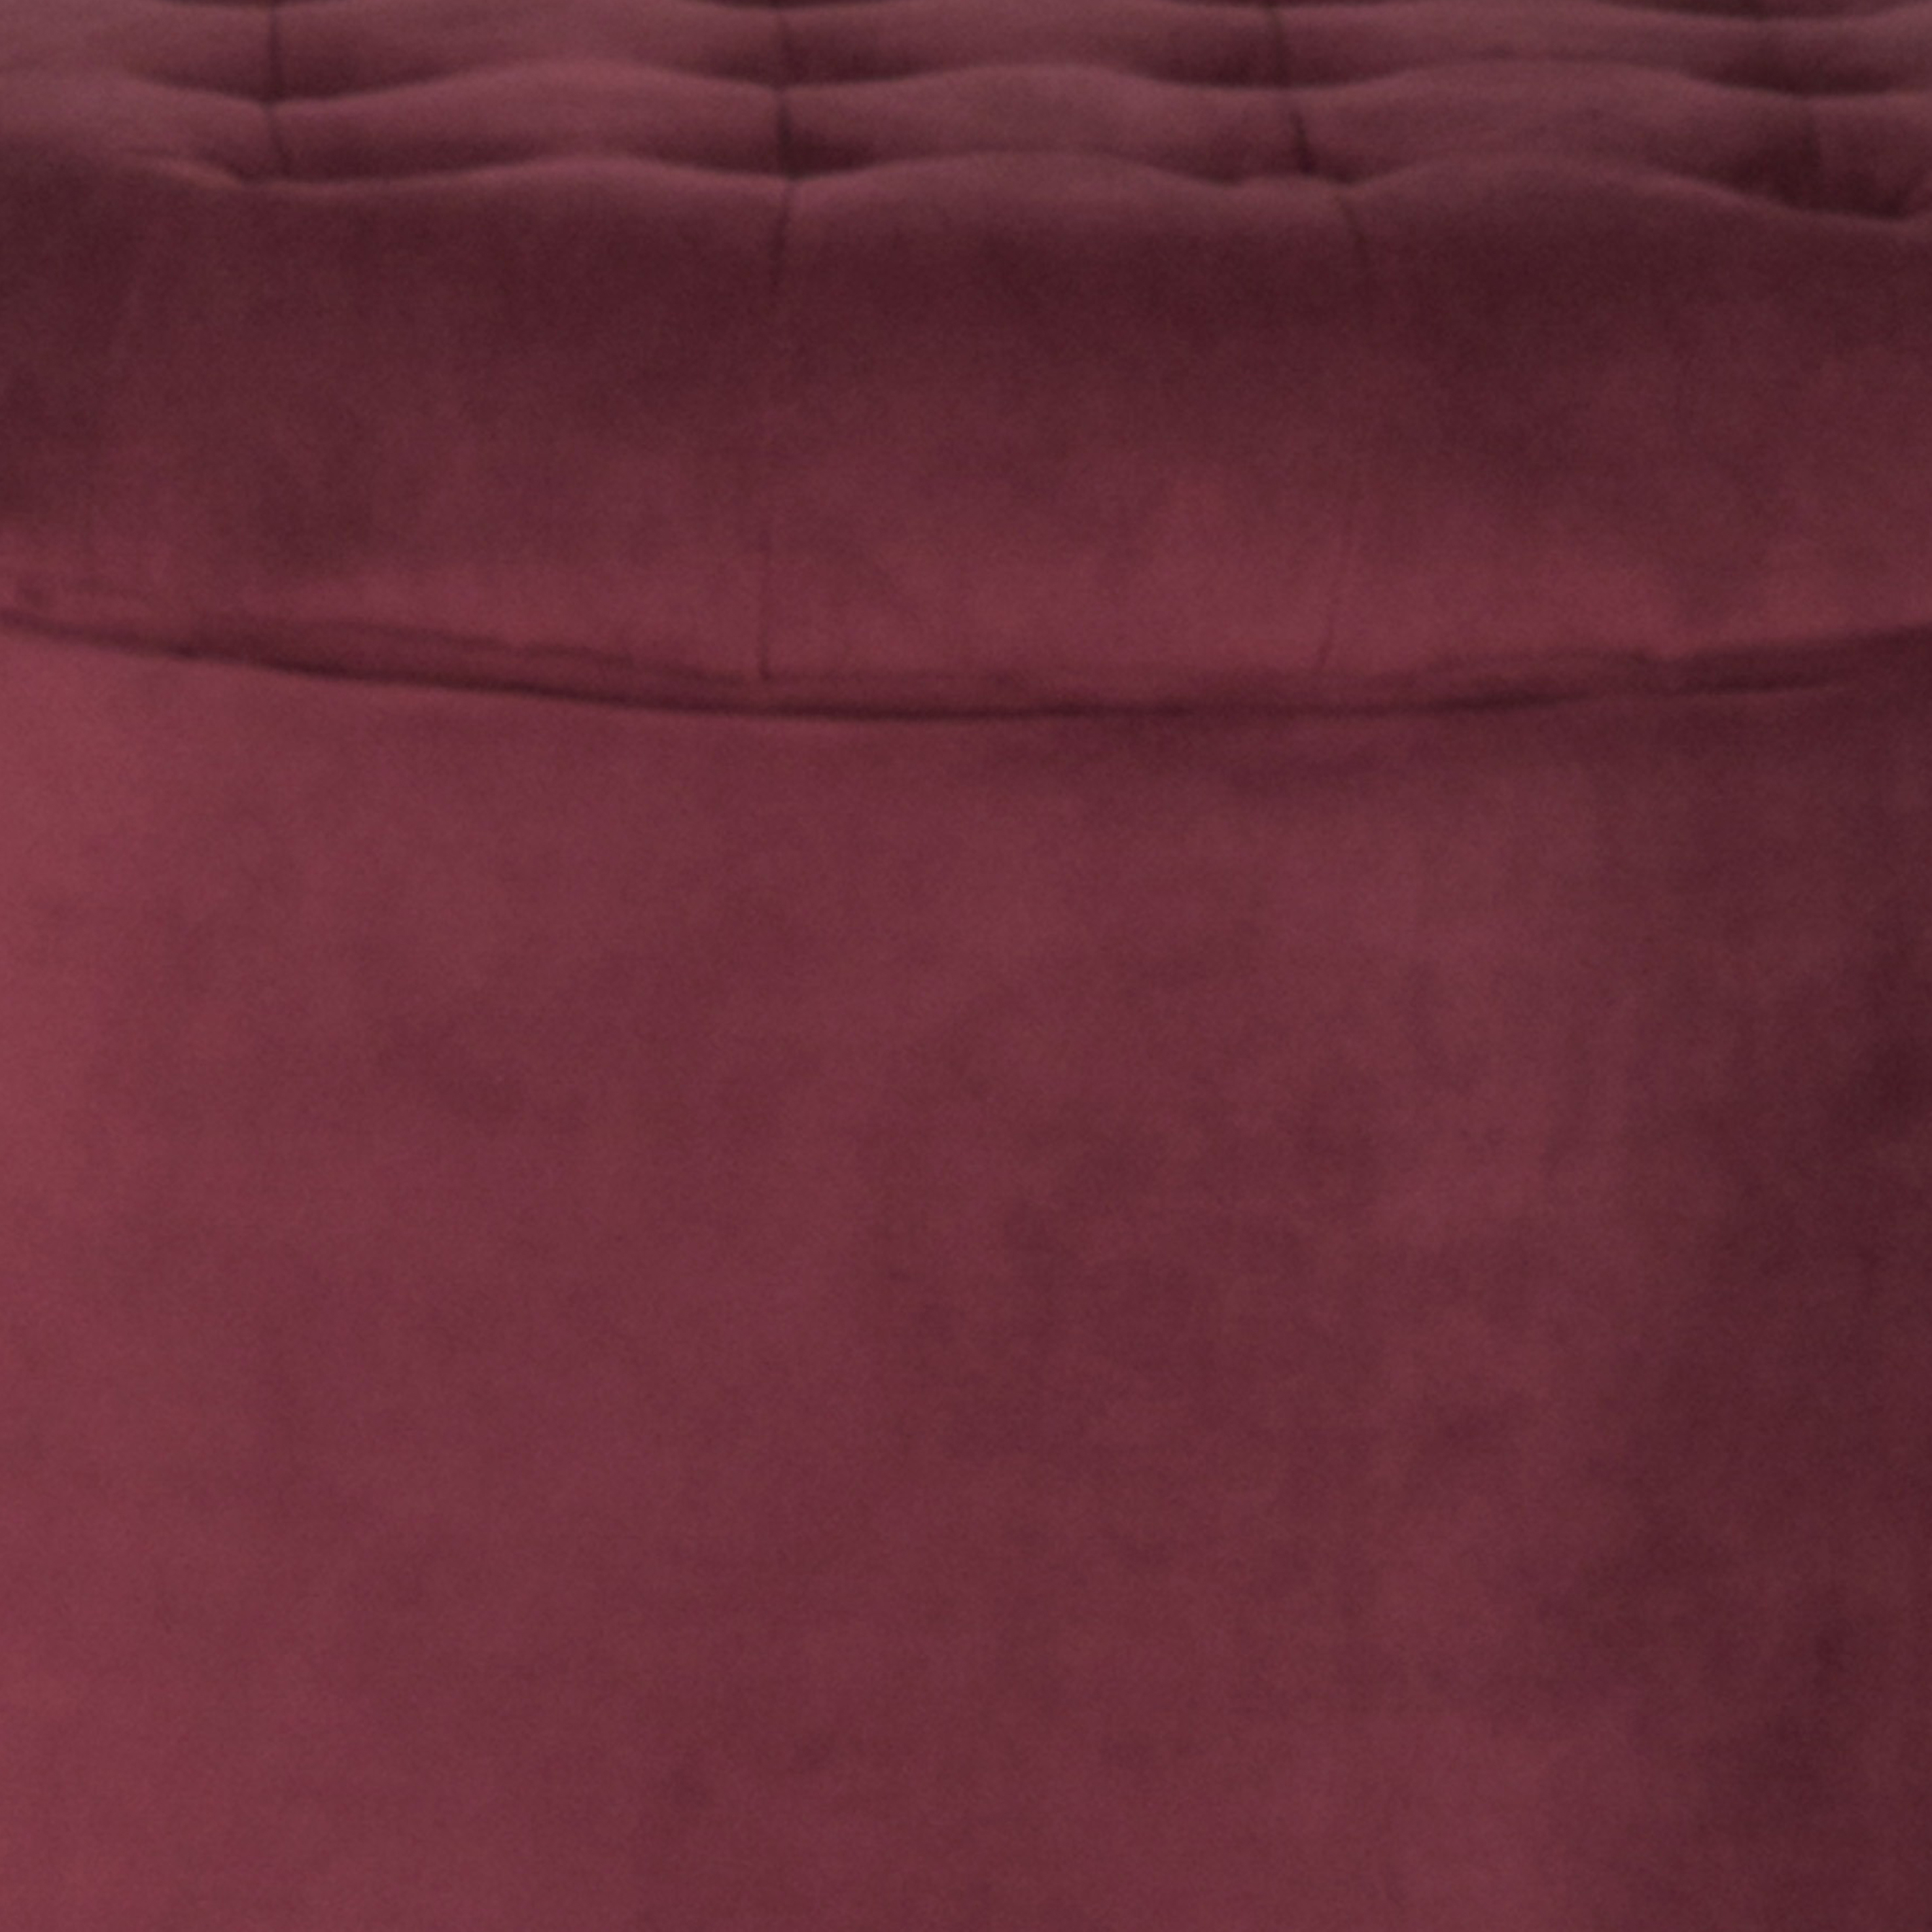 Button Tufted Velvet Upholstered Wooden Ottoman With Hidden Storage, Red And Brown- Saltoro Sherpi